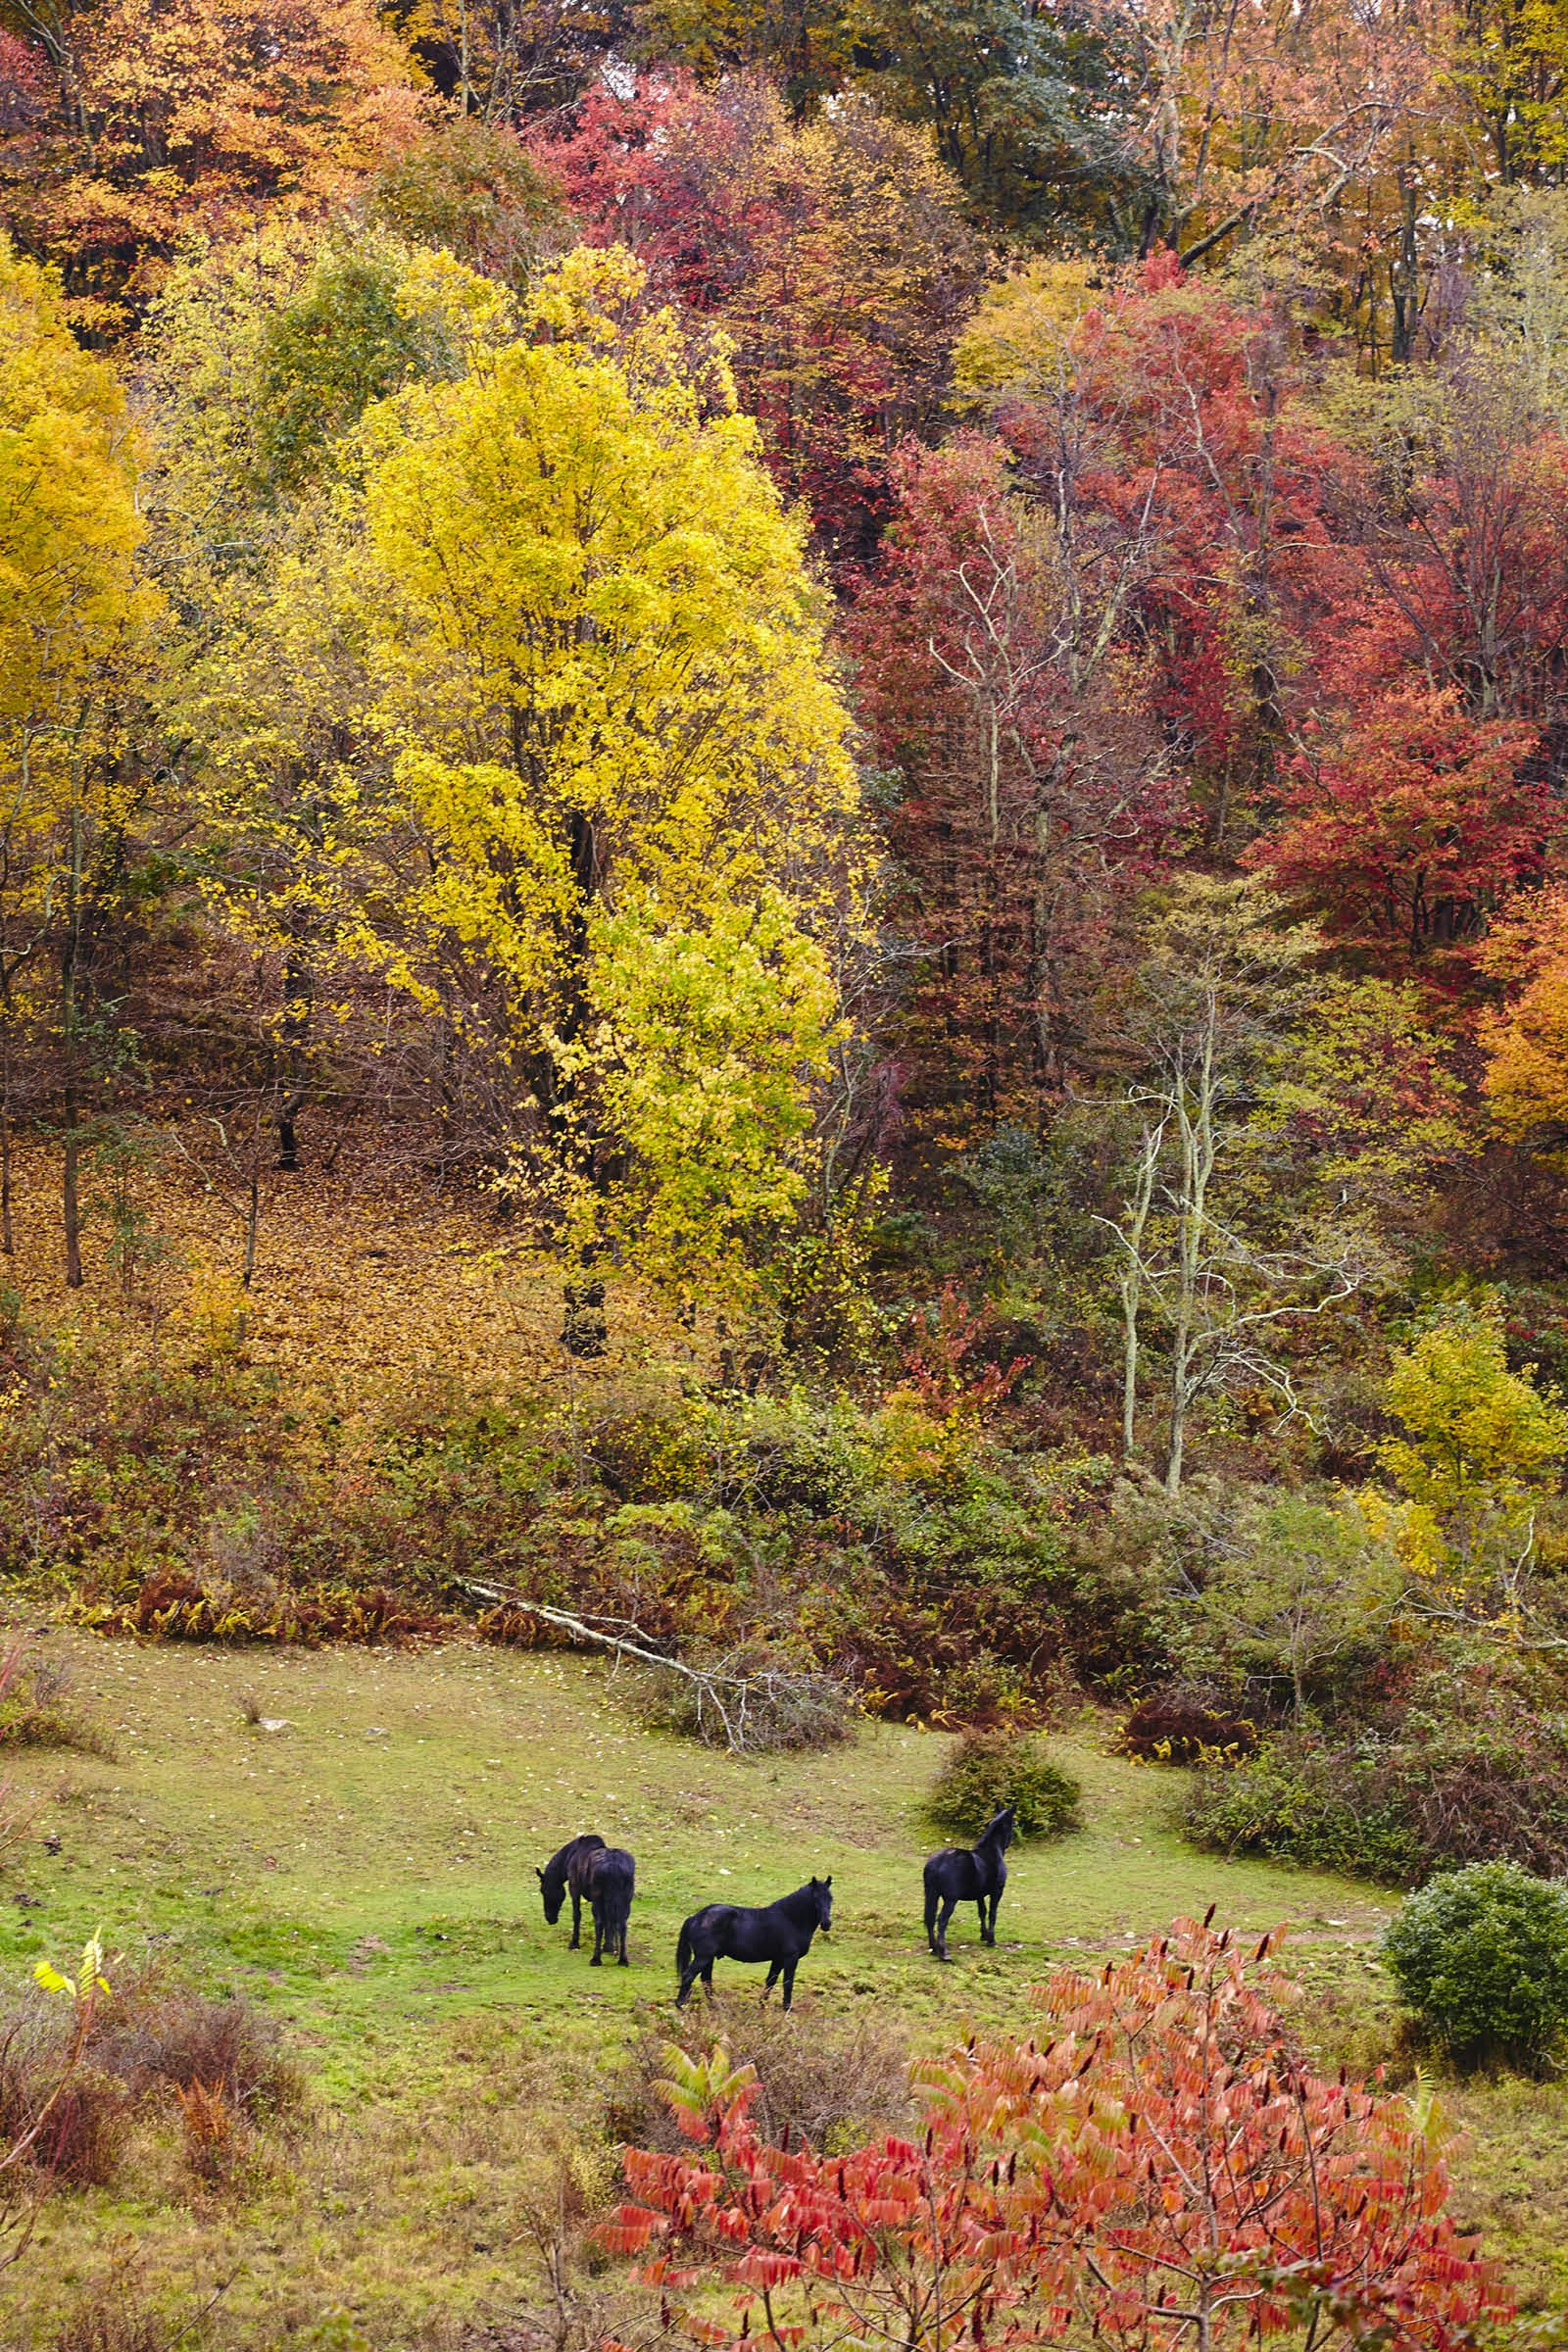 Three black horses in a field surrounded by autumn colours